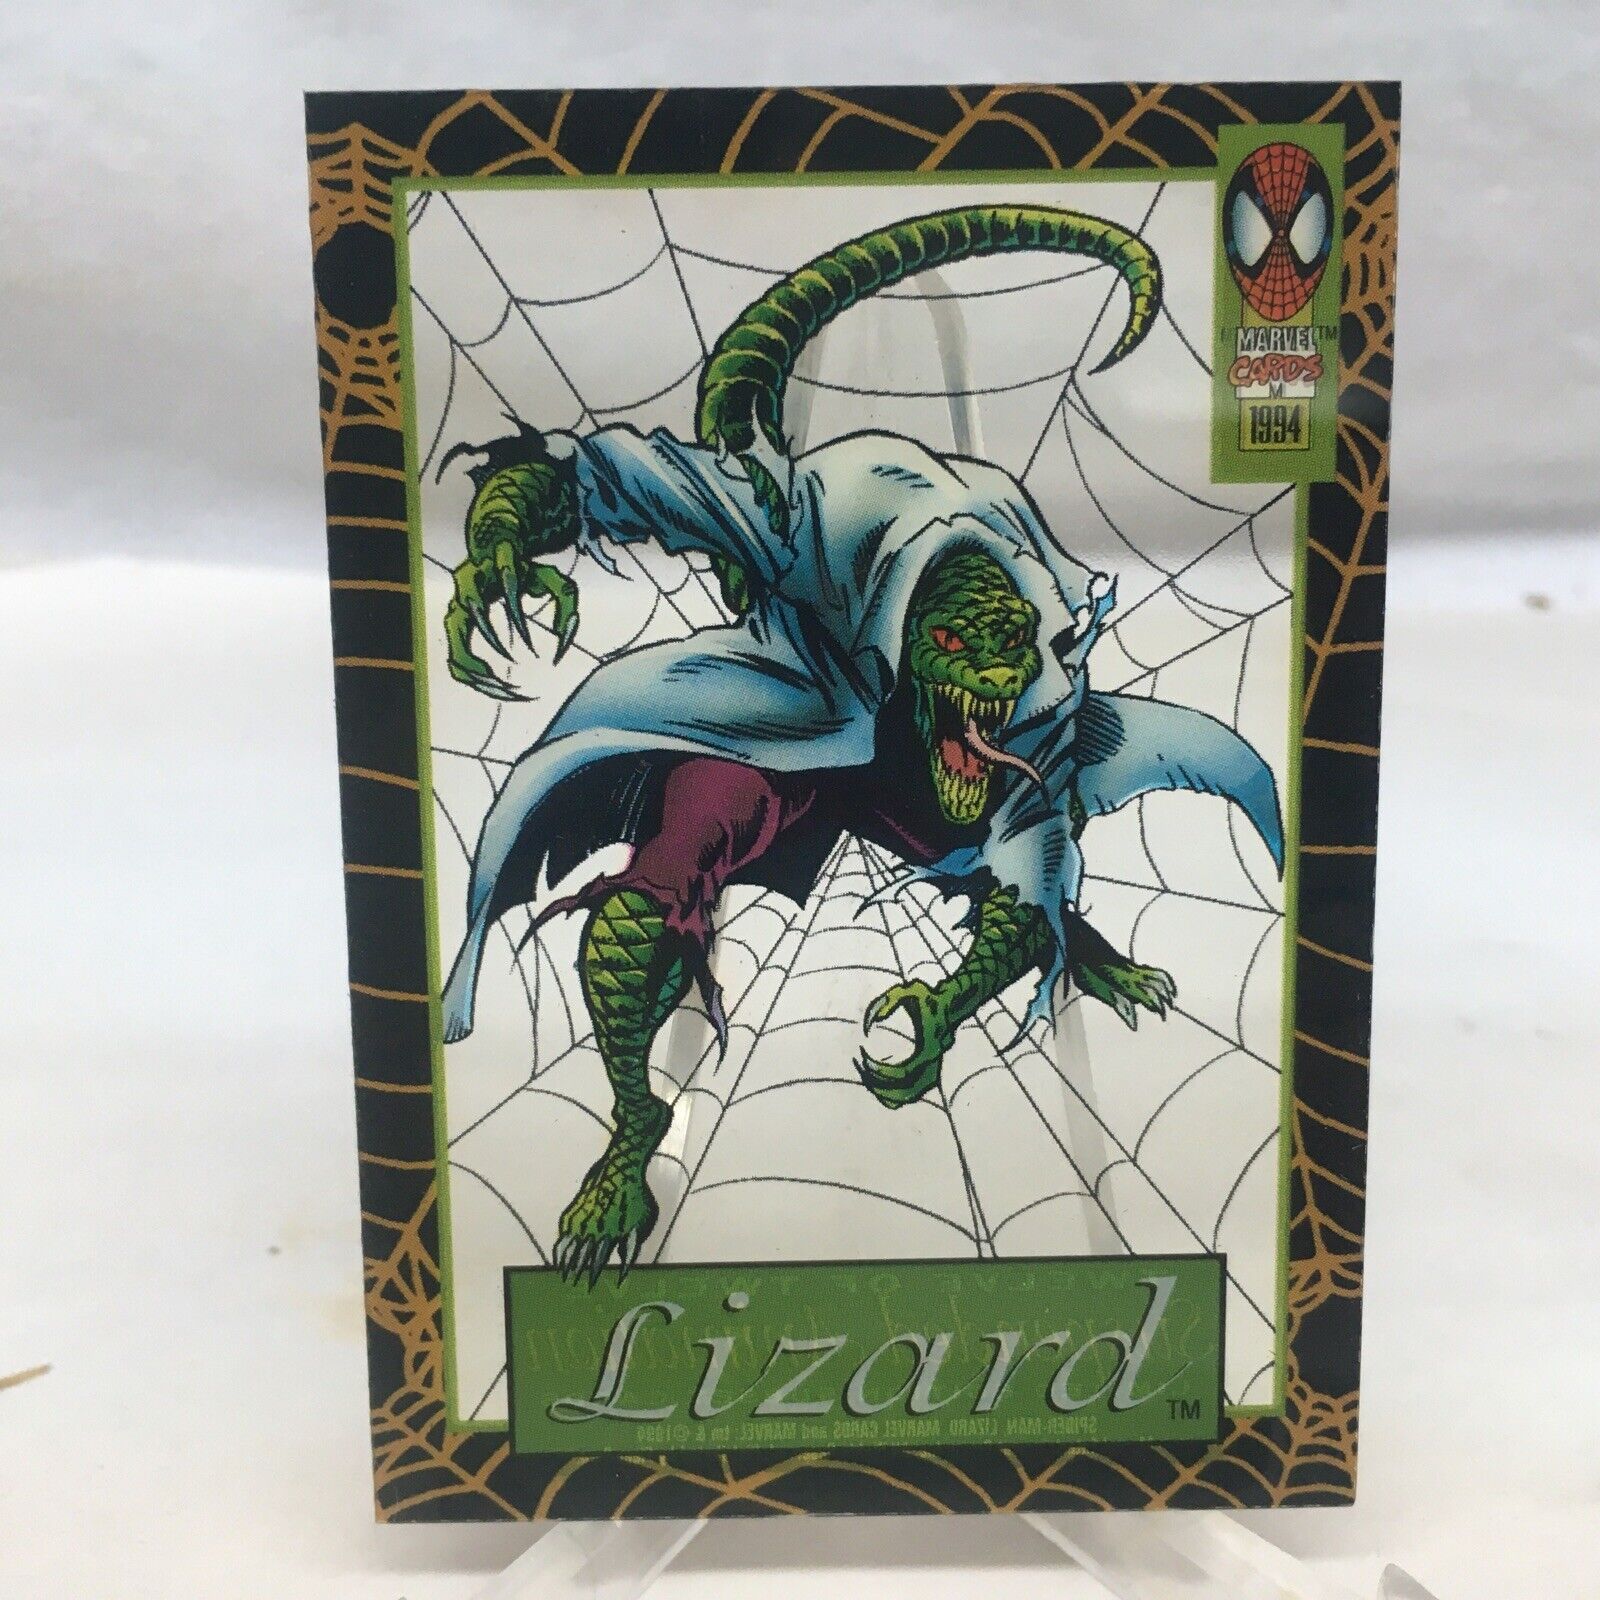 1994 Marvel Amazing Spider-Man Suspended Animation Card #12 of 12 Lizard